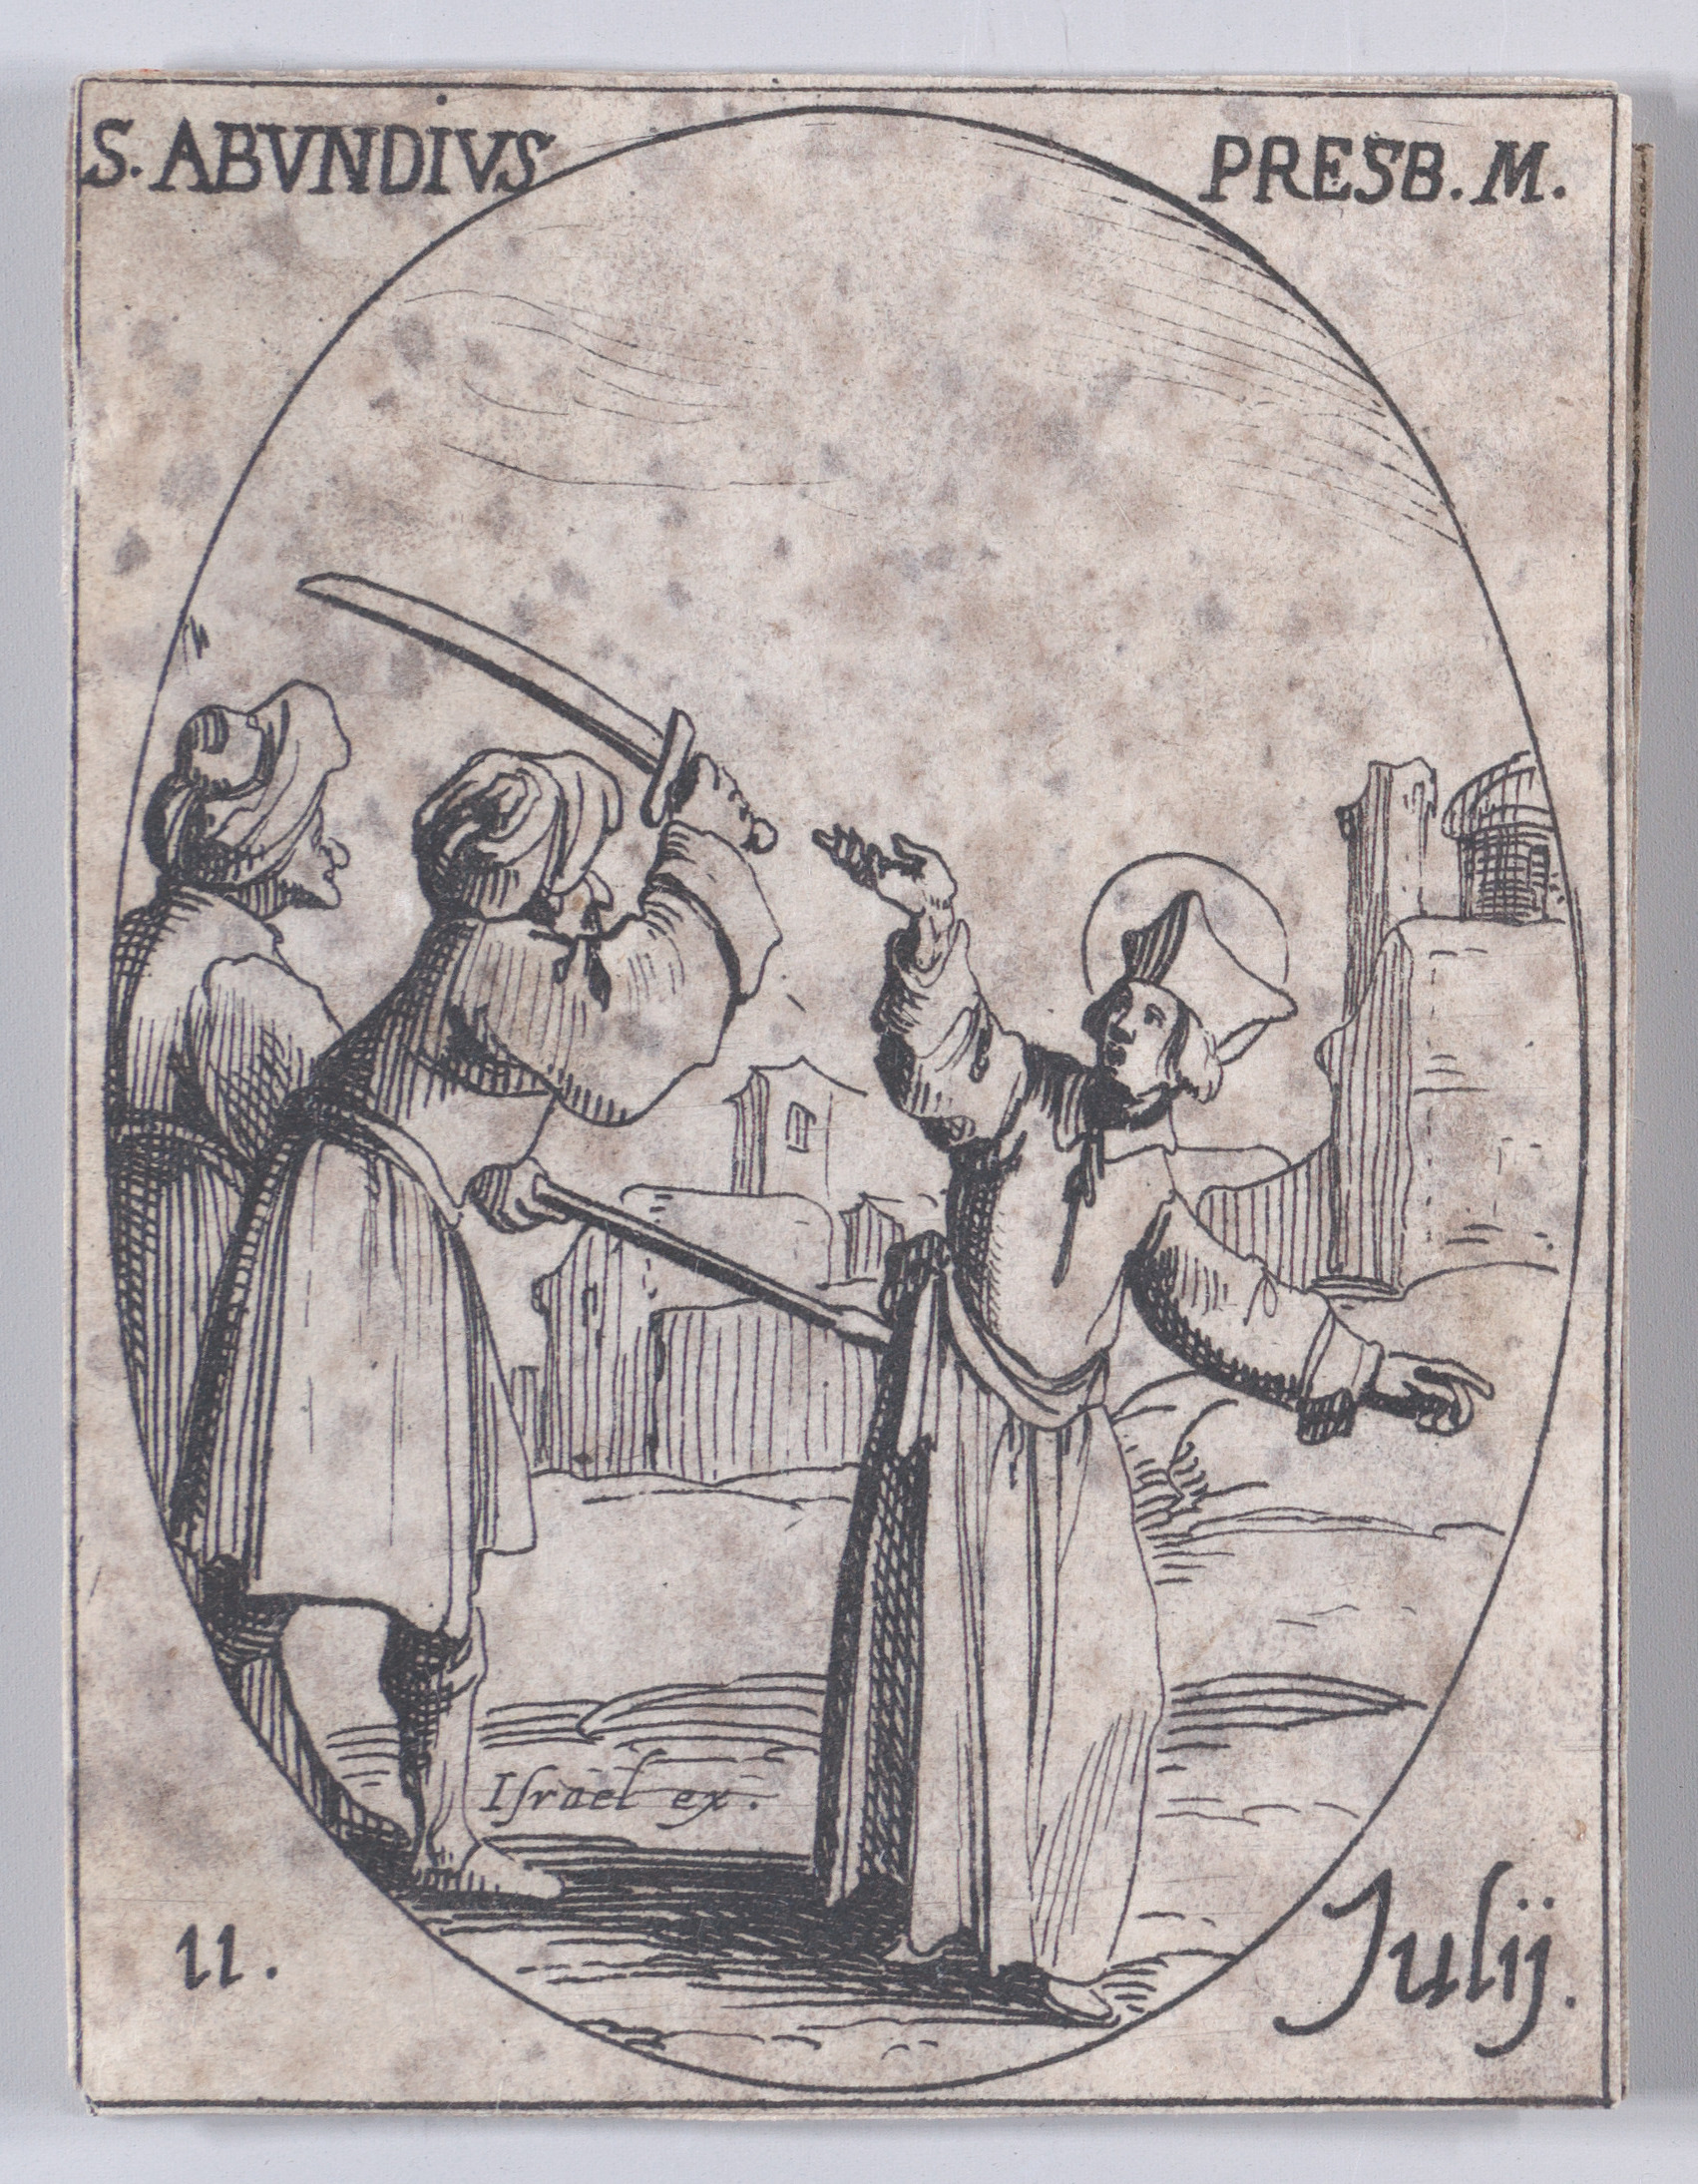 S. Abondie, prêtre et martyr (St. Abundius, Priest and Martyr), July 11th, from Les Images De Tous Les Saincts et Saintes de L'Année (Images of All of the Saints and Religious Events of the Year), Jacques Callot (French, Nancy 1592–1635 Nancy), Etching; second state of two (Lieure)